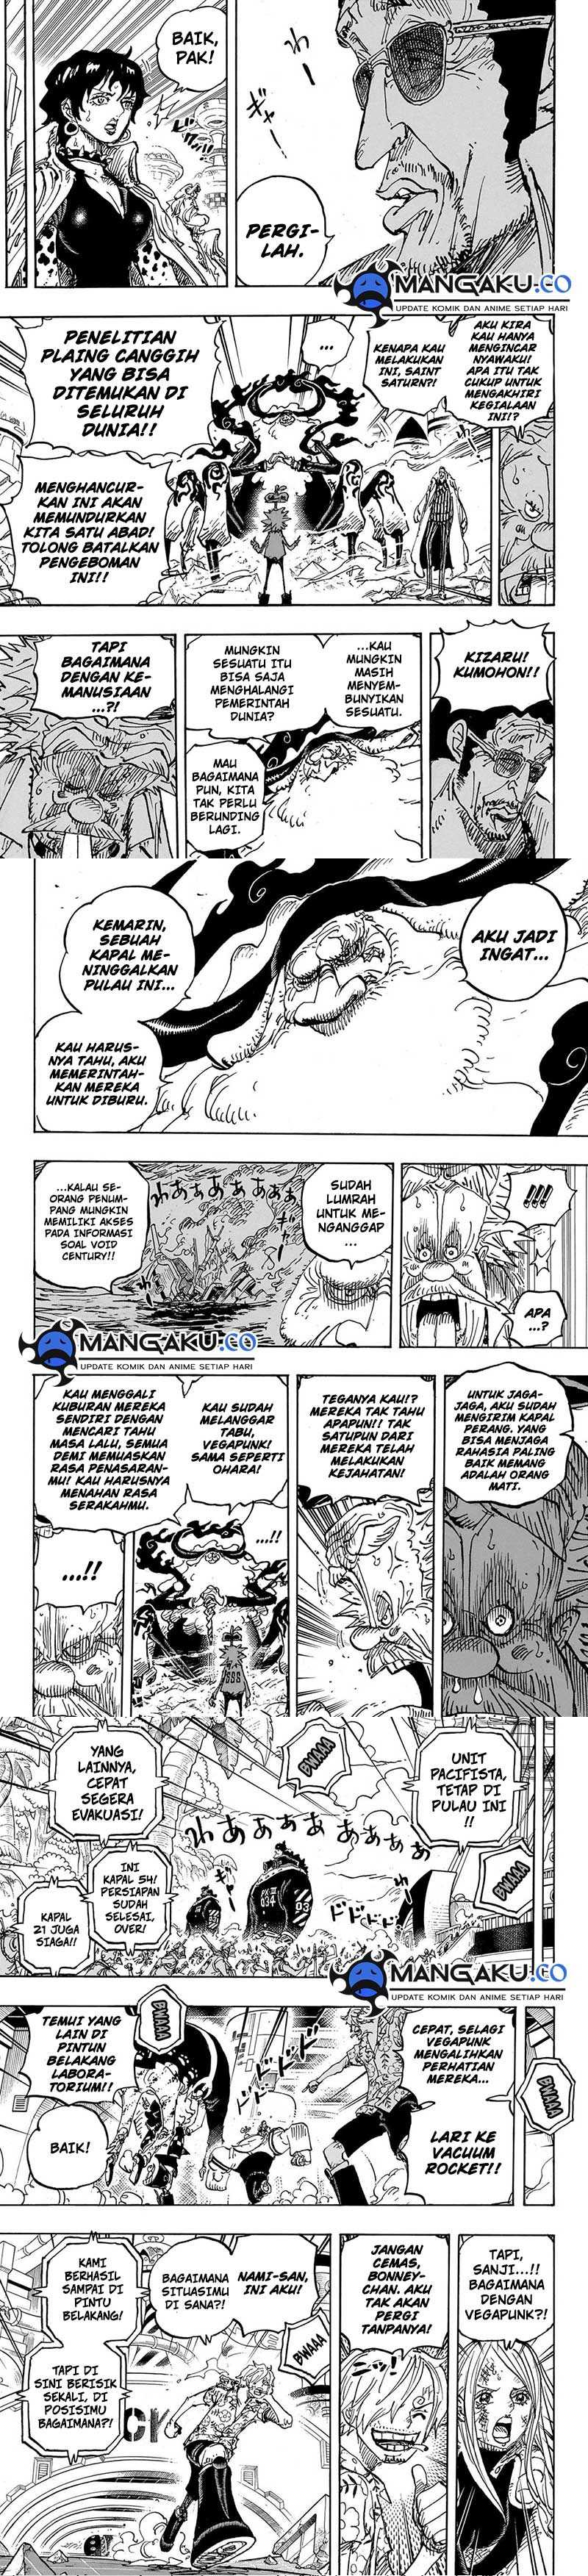 One Piece Chapter 1105